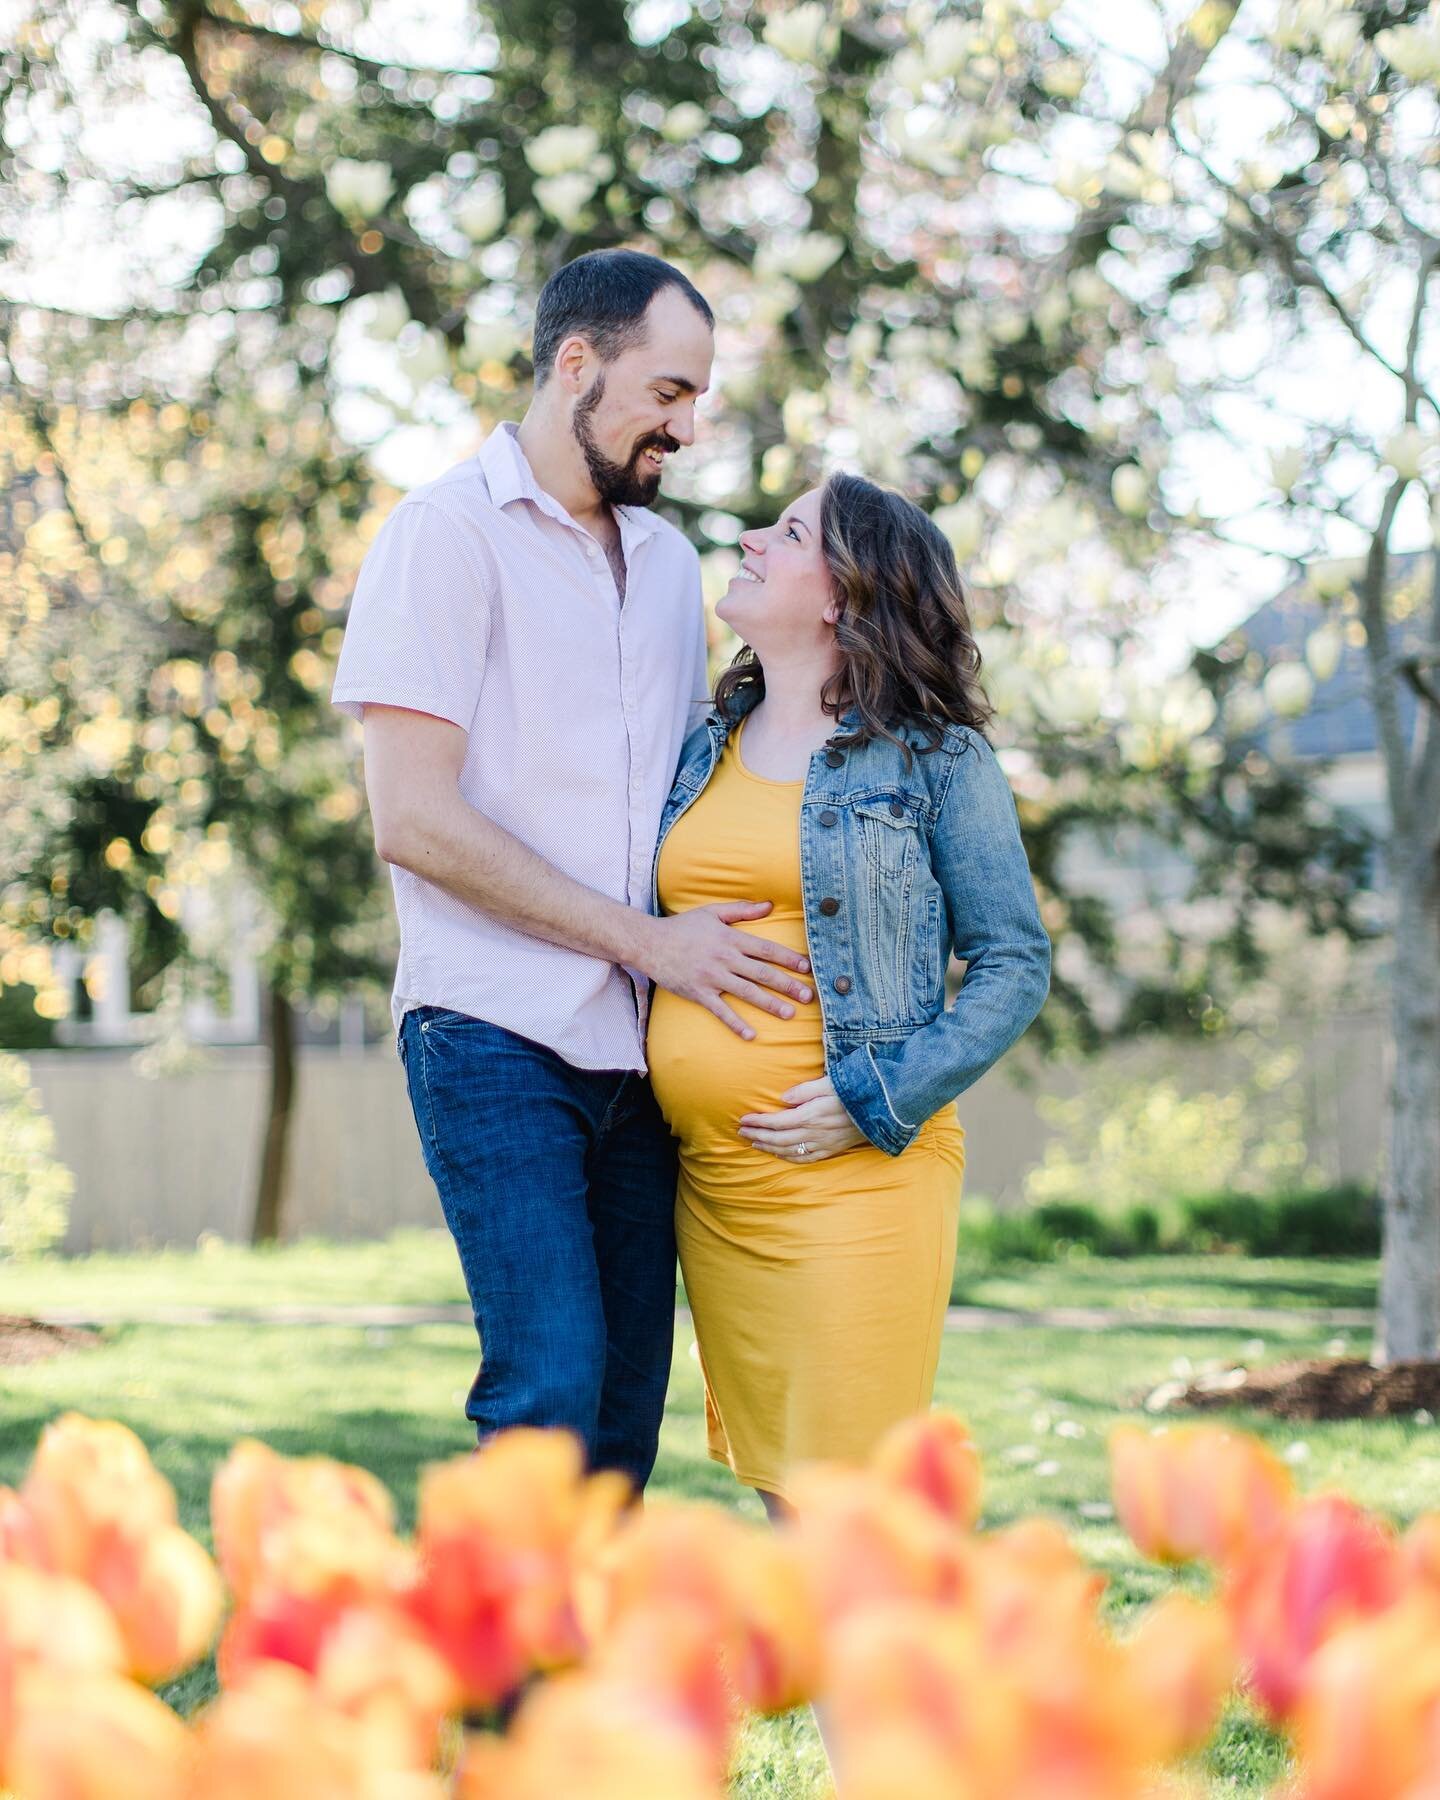 From engagement photos to  wedding photos and now their maternity photos 🥰